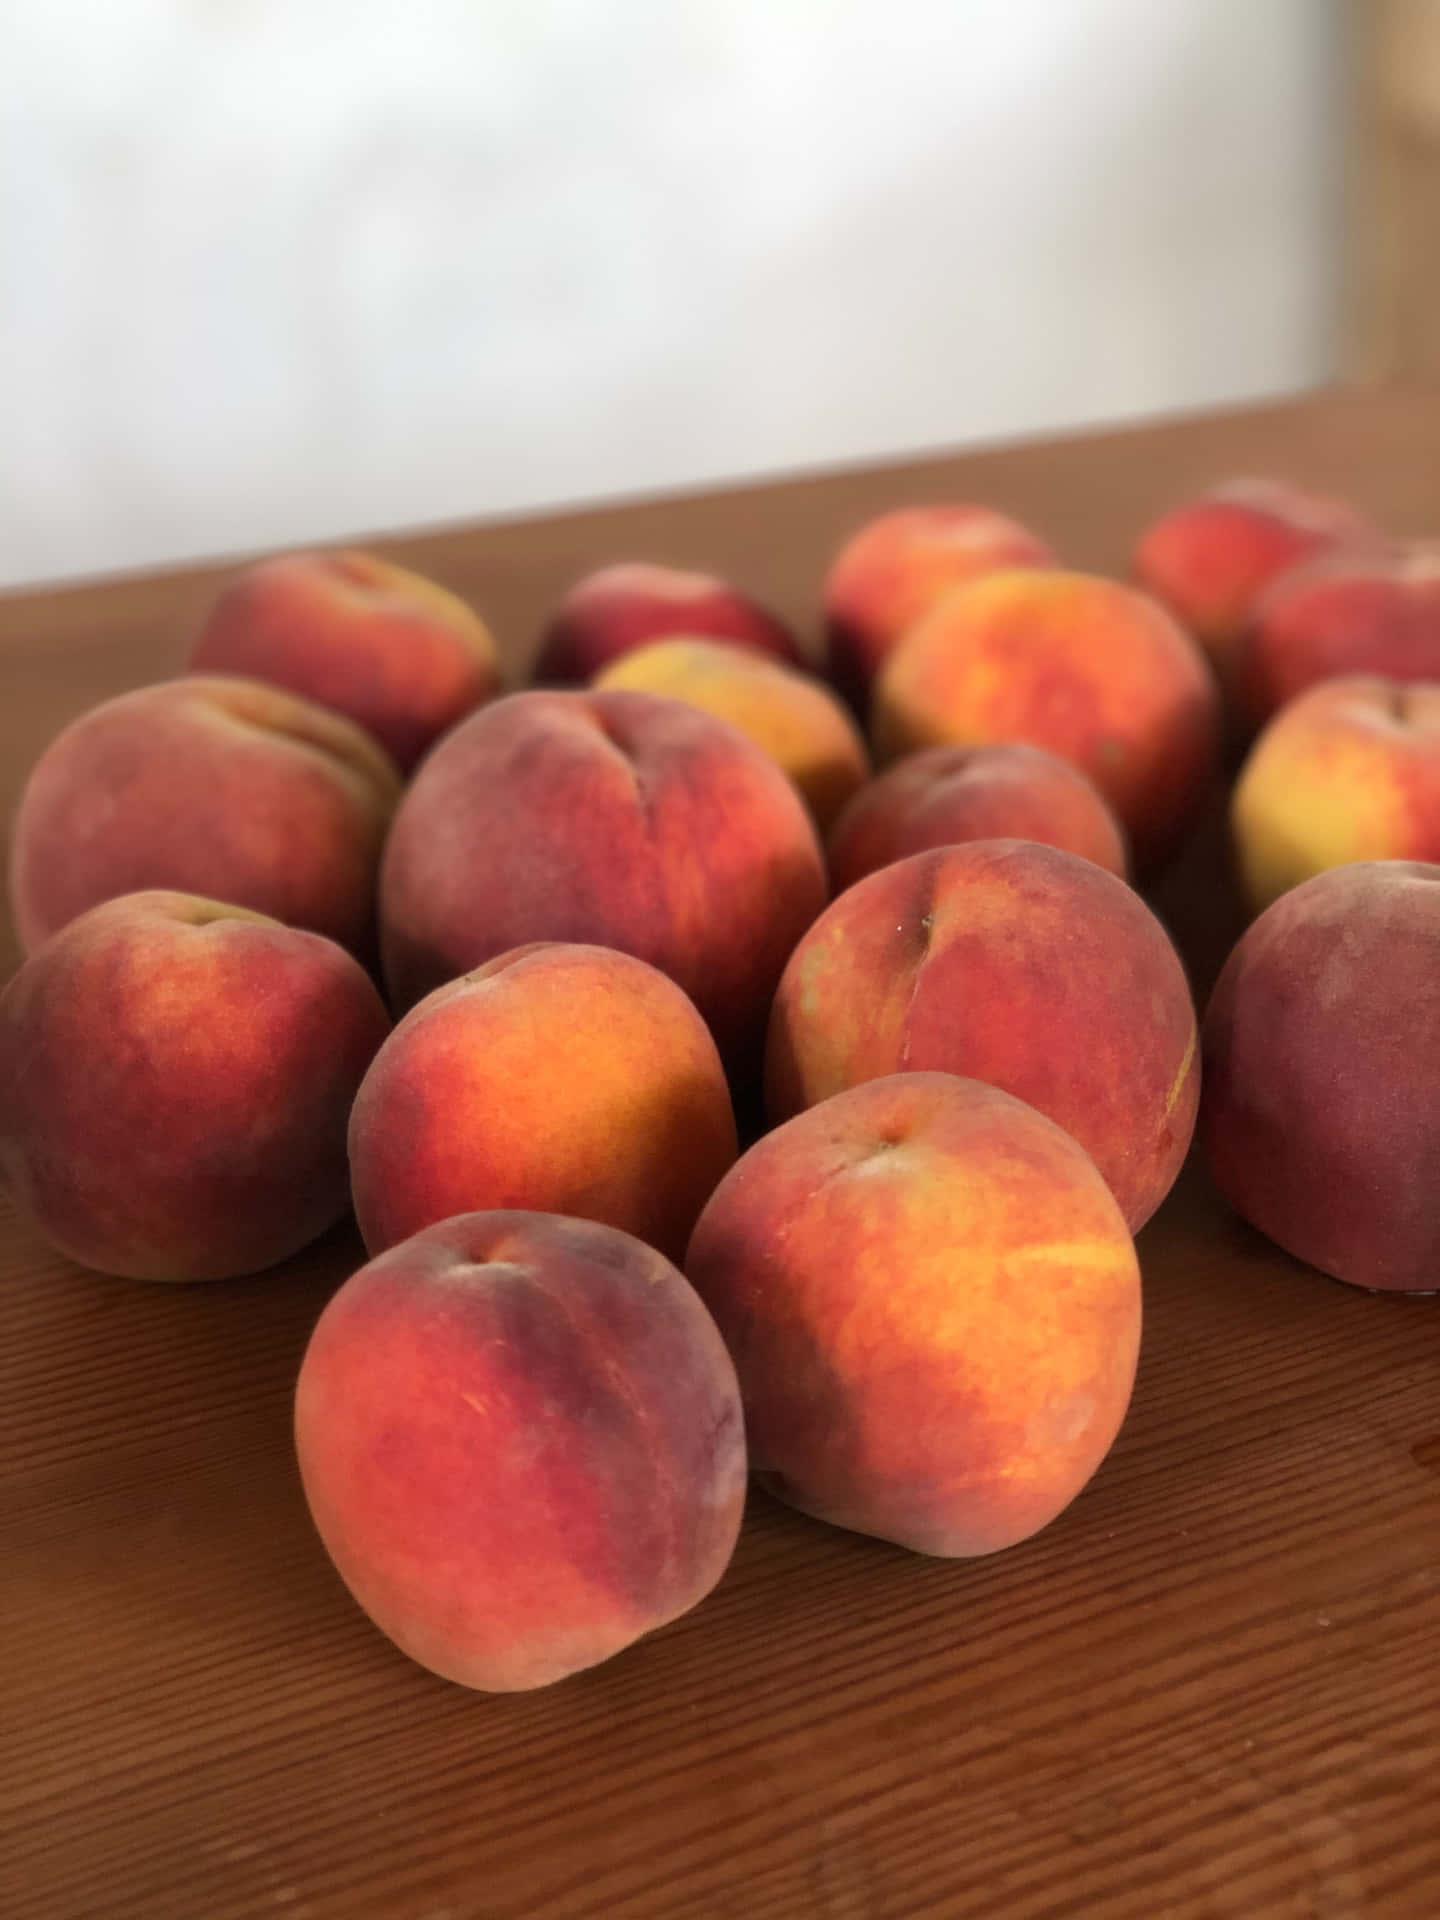 Peaches On A Wooden Table